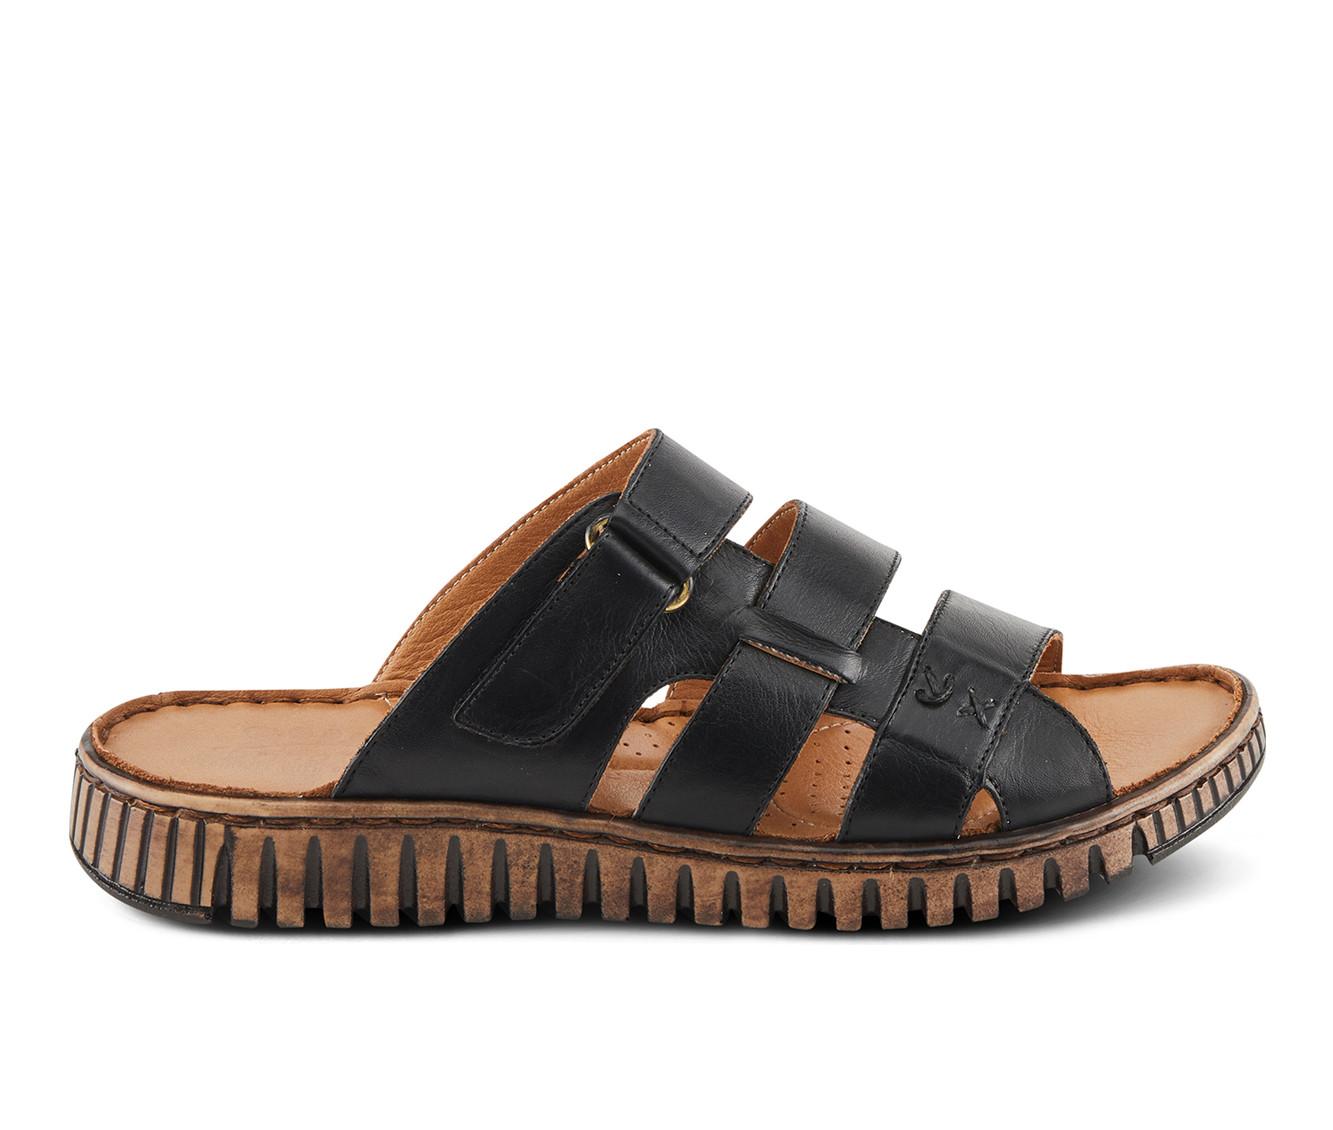 Women's SPRING STEP Olly Sandals